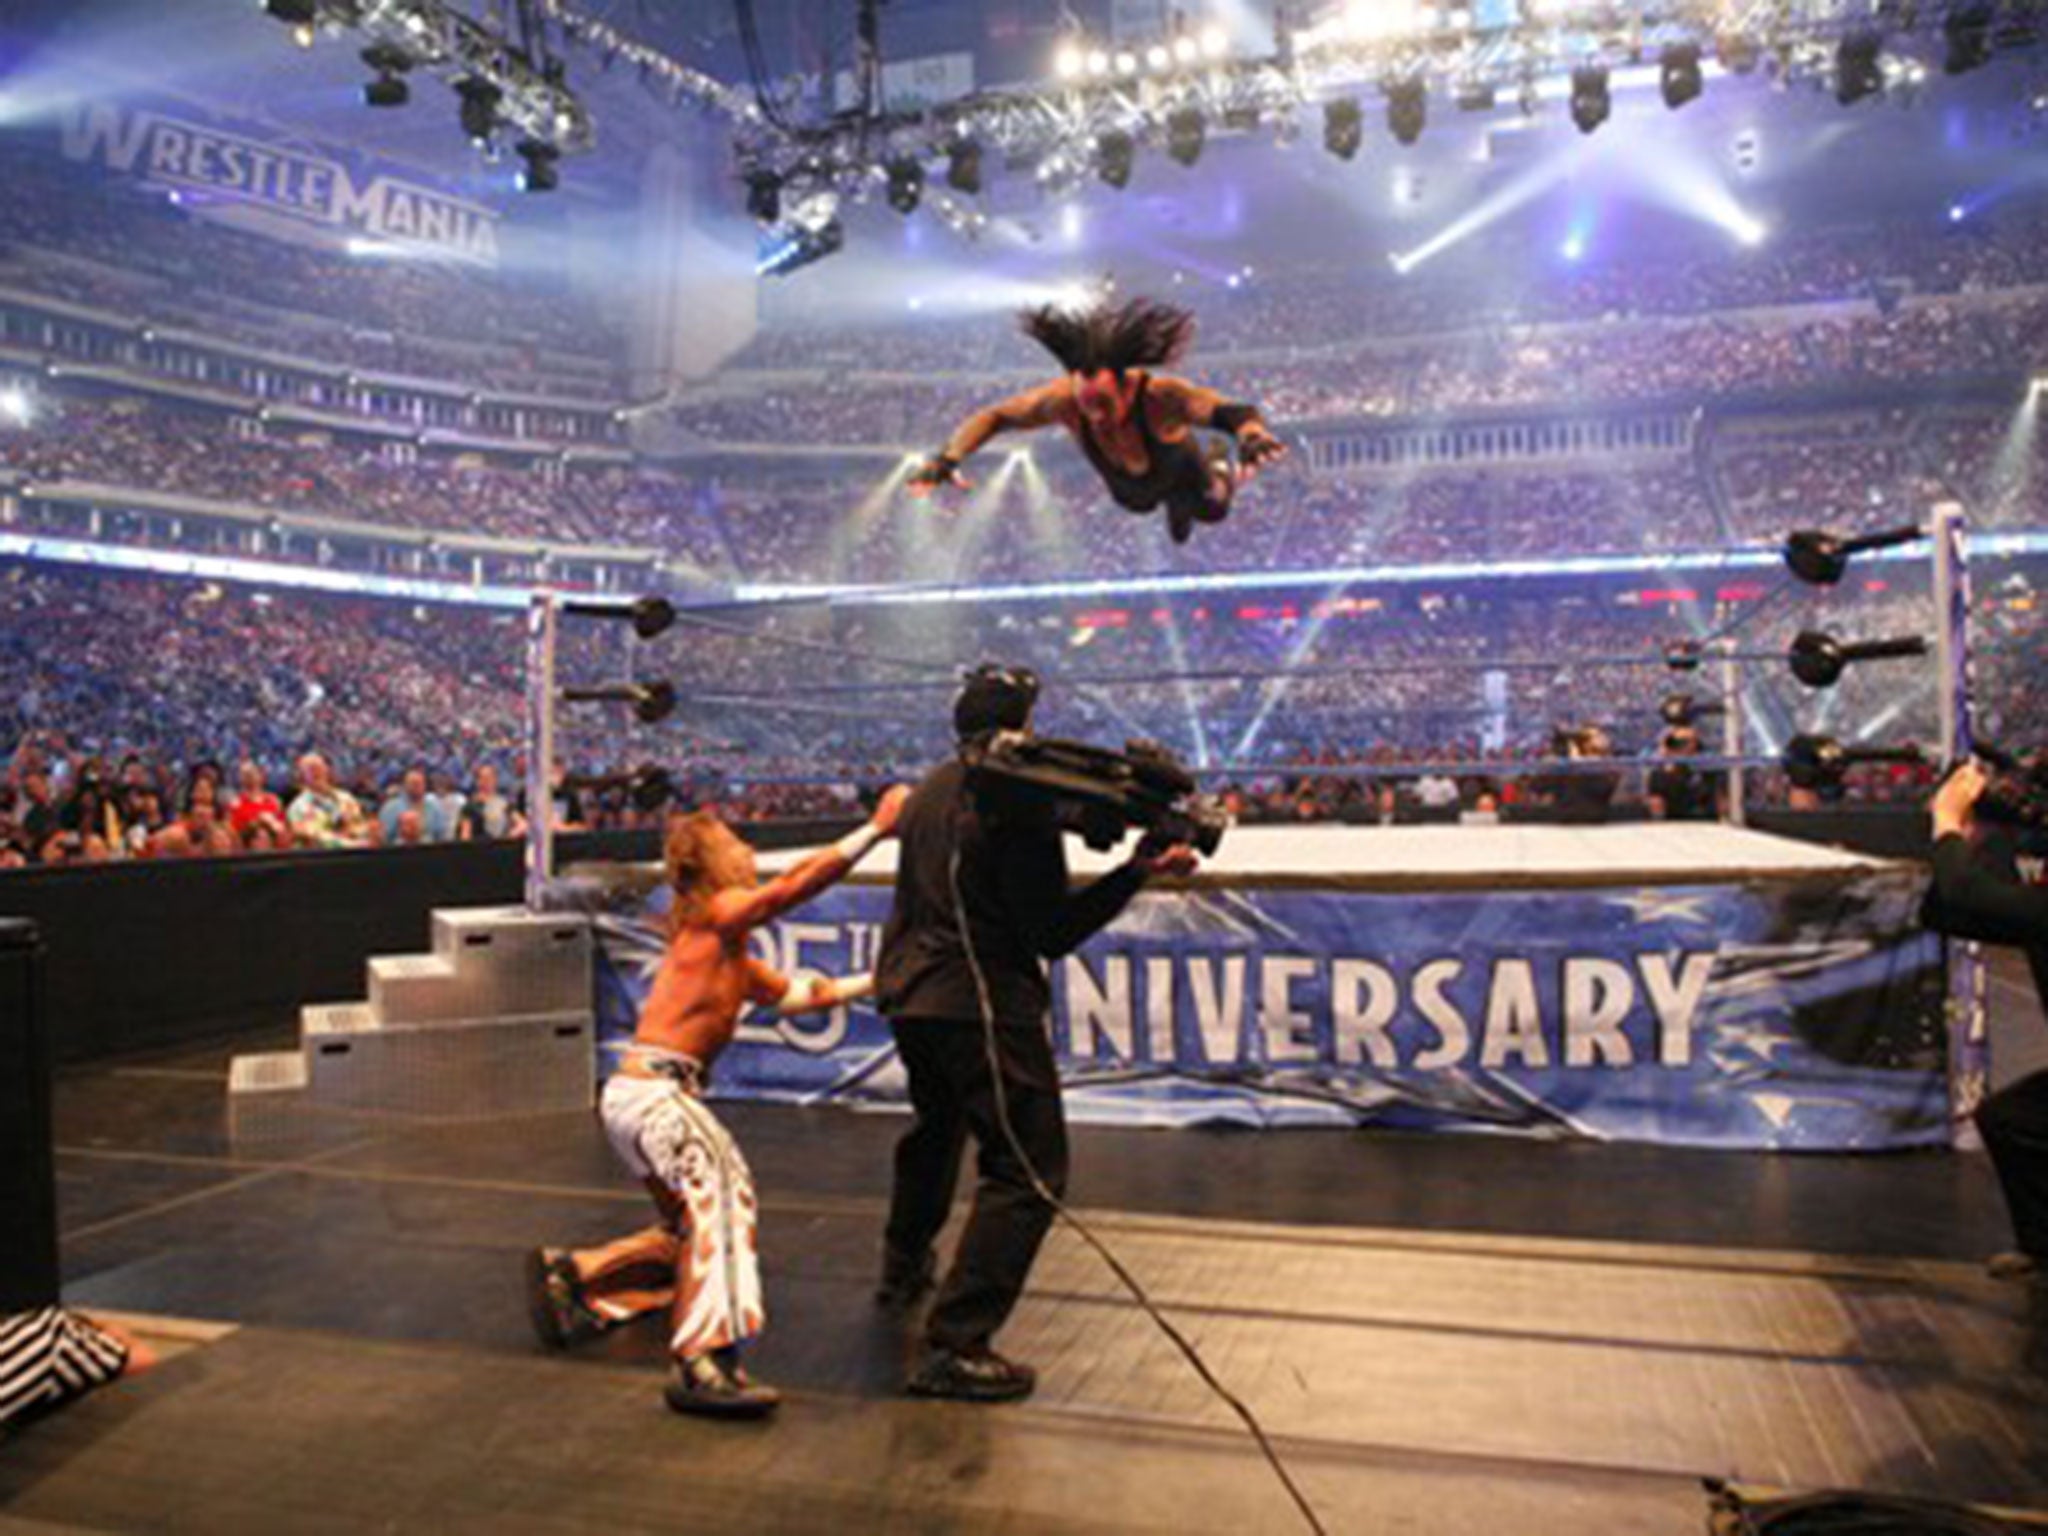 2. The Undertaker vs. Shawn Michaels - WrestleMania XXV
The 2009 match of the year is also seen as one of the matches of the decade as fans saw an emotional battle that was full of twists and turns that told a truly engaging story. Despite the age of the